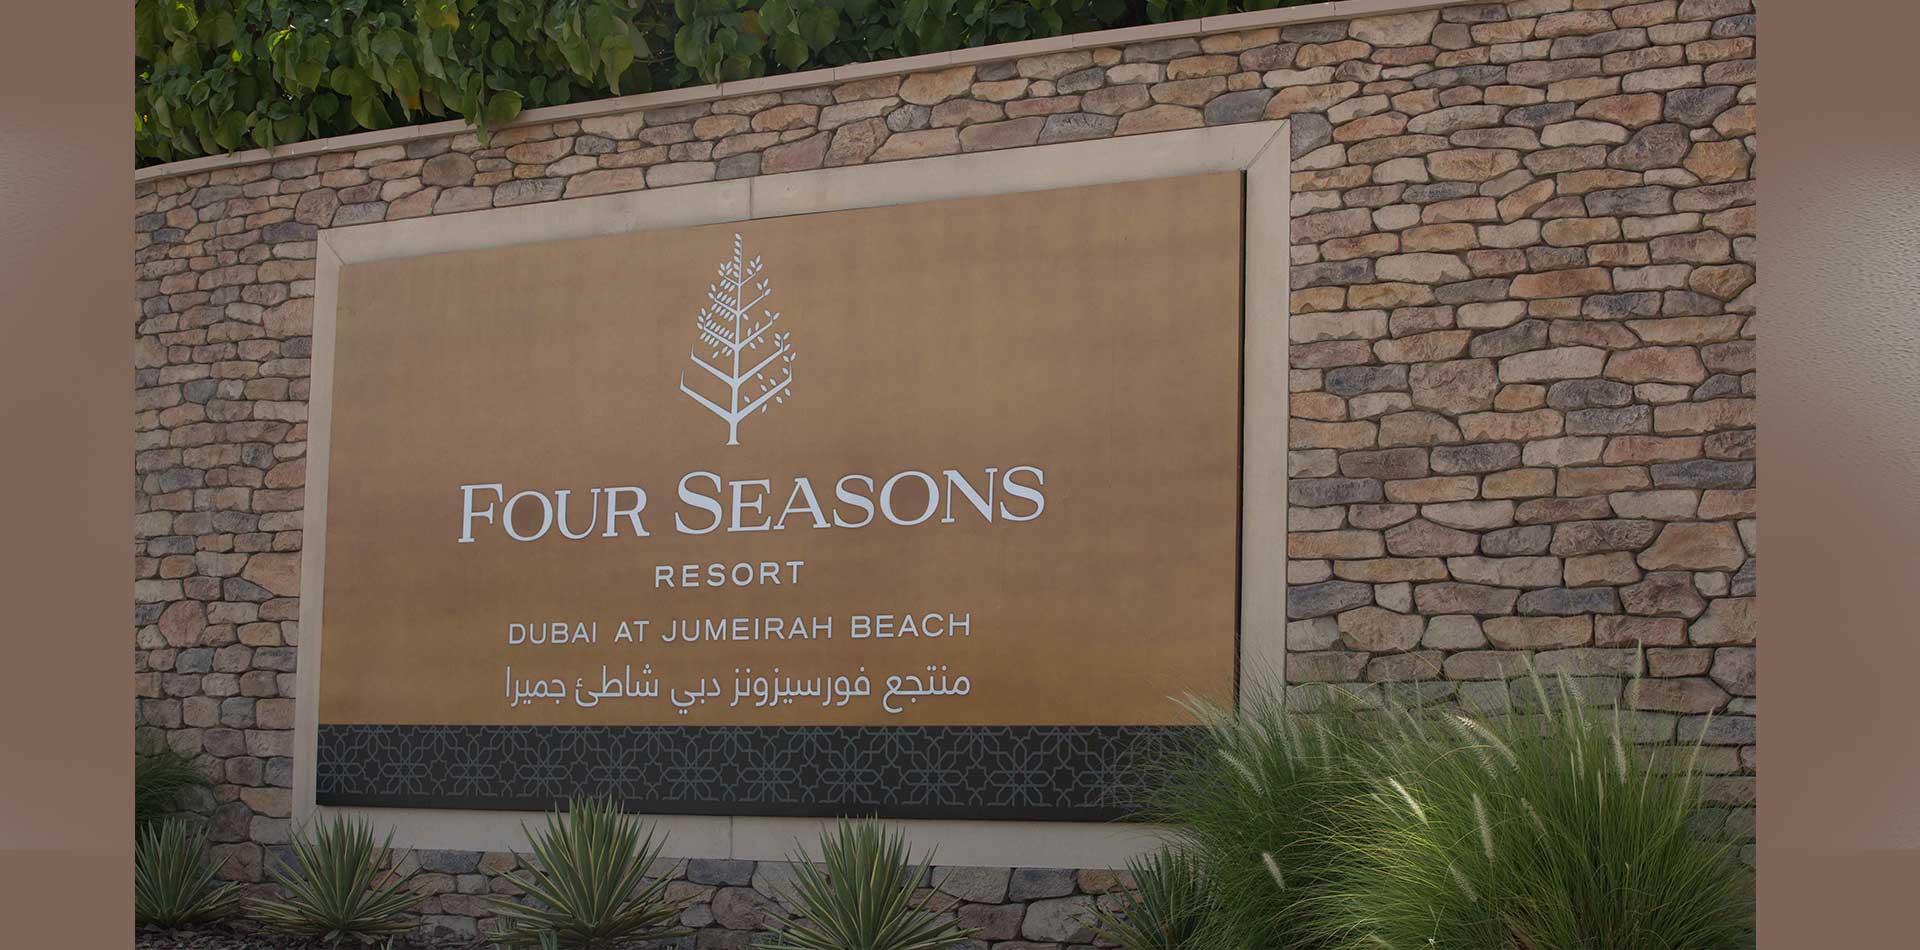 Monument Signage for Four Seasons Resort